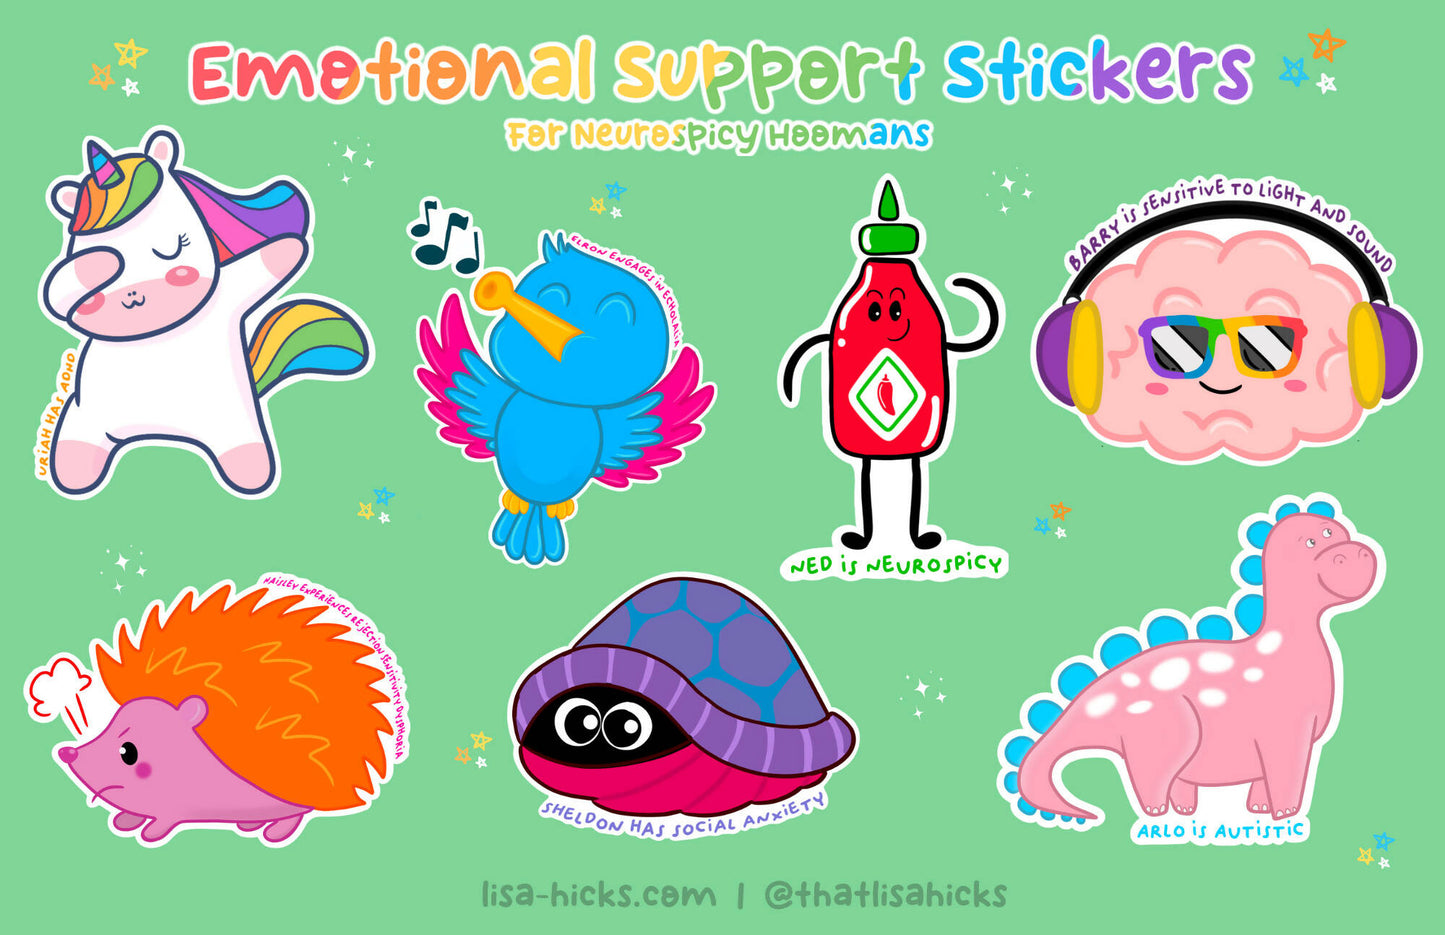 Emotional Support Stickers for Neurospicy Hoomans